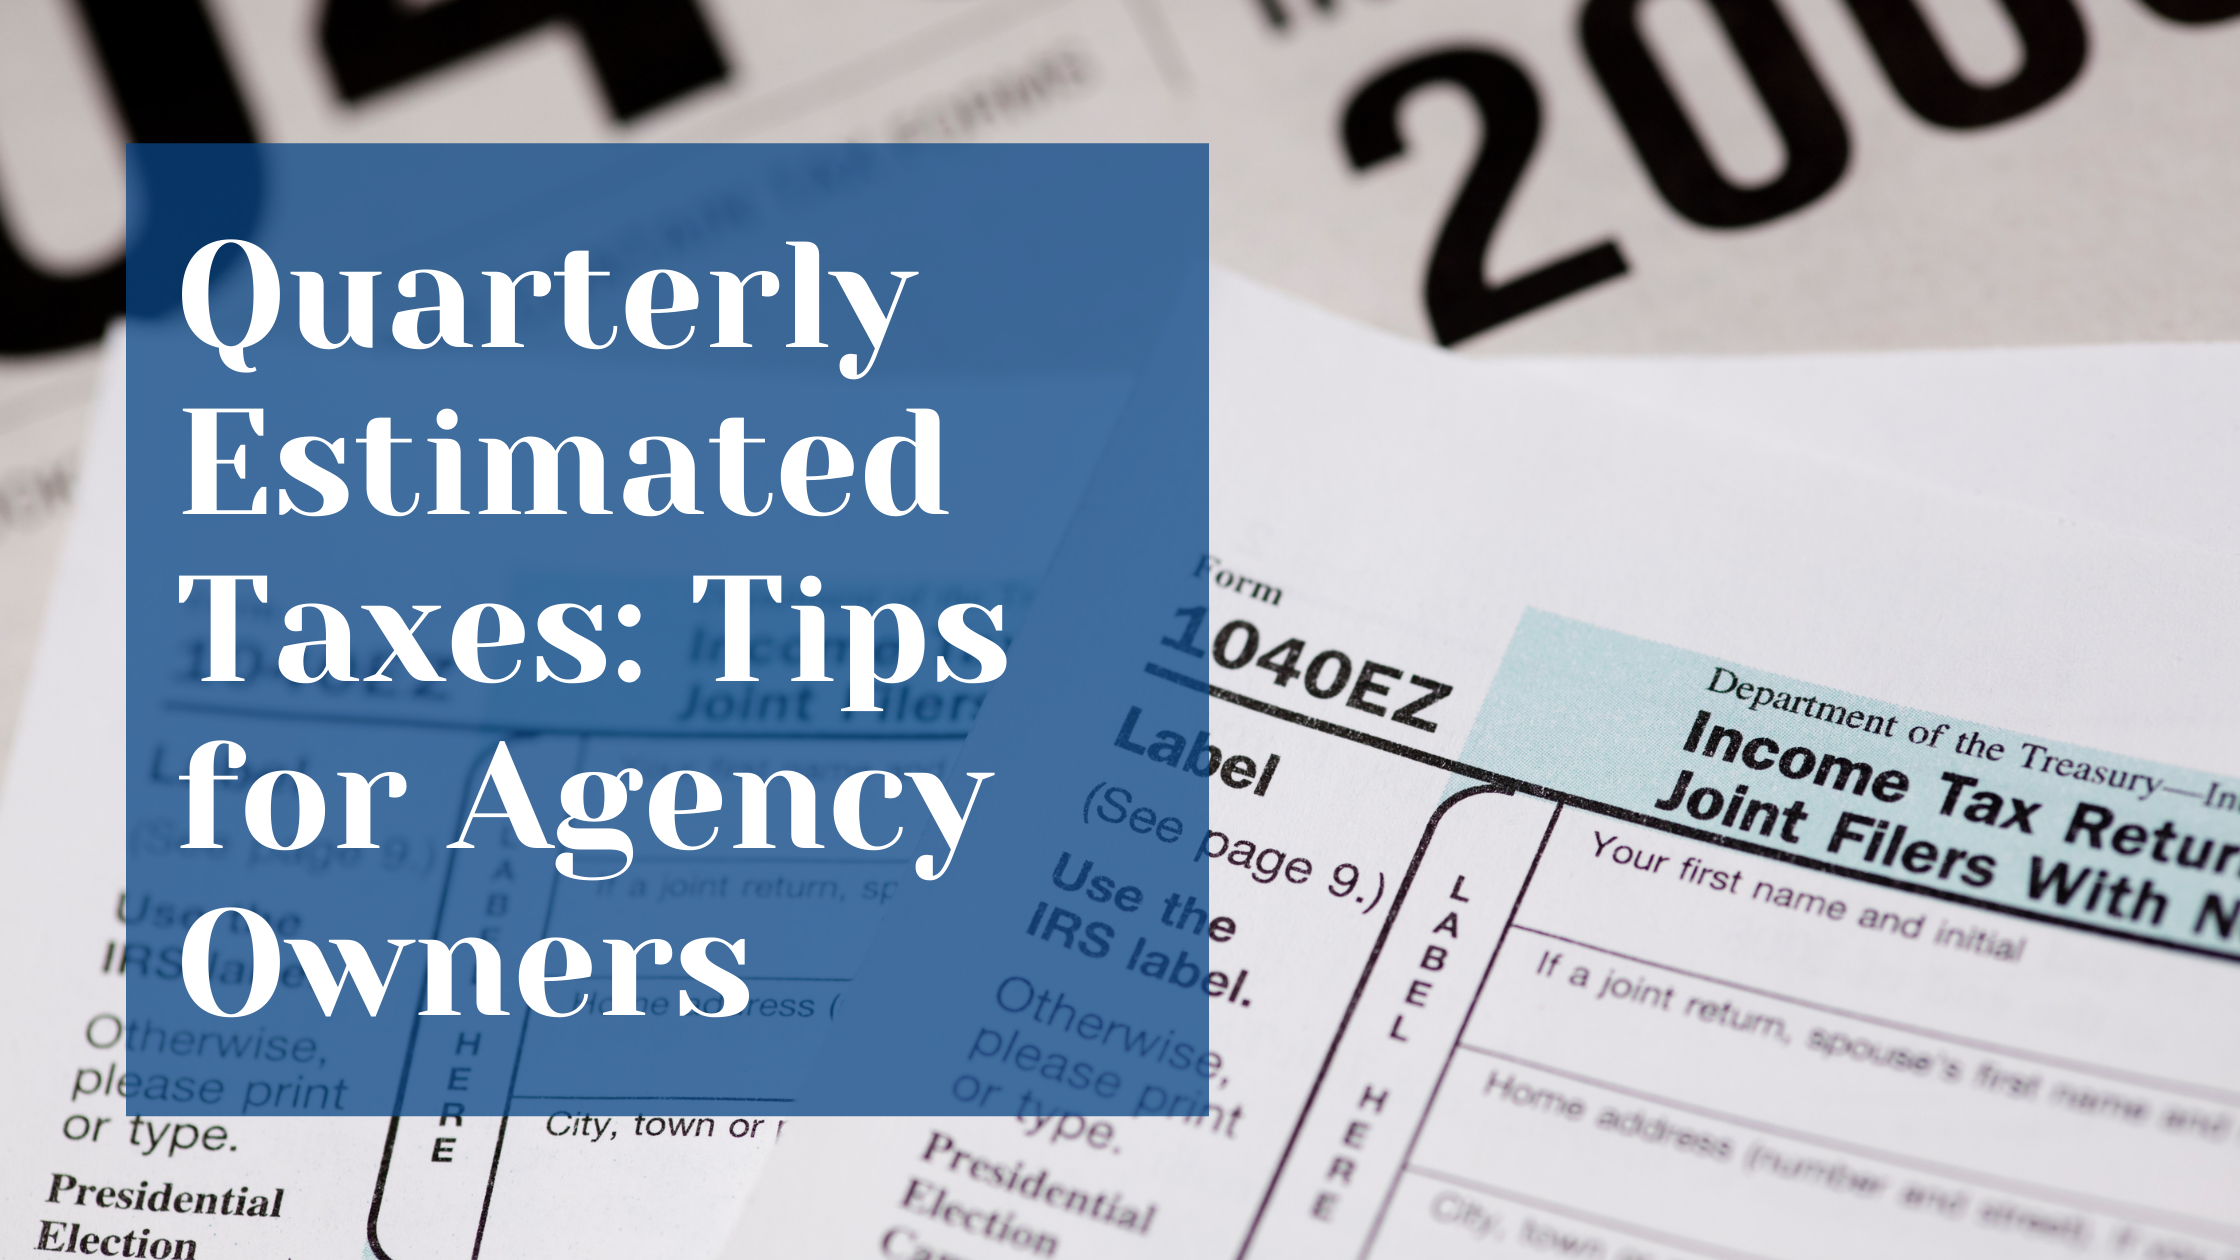 Quarterly Estimated Taxes Explained: What Every Agency Owner Should Know